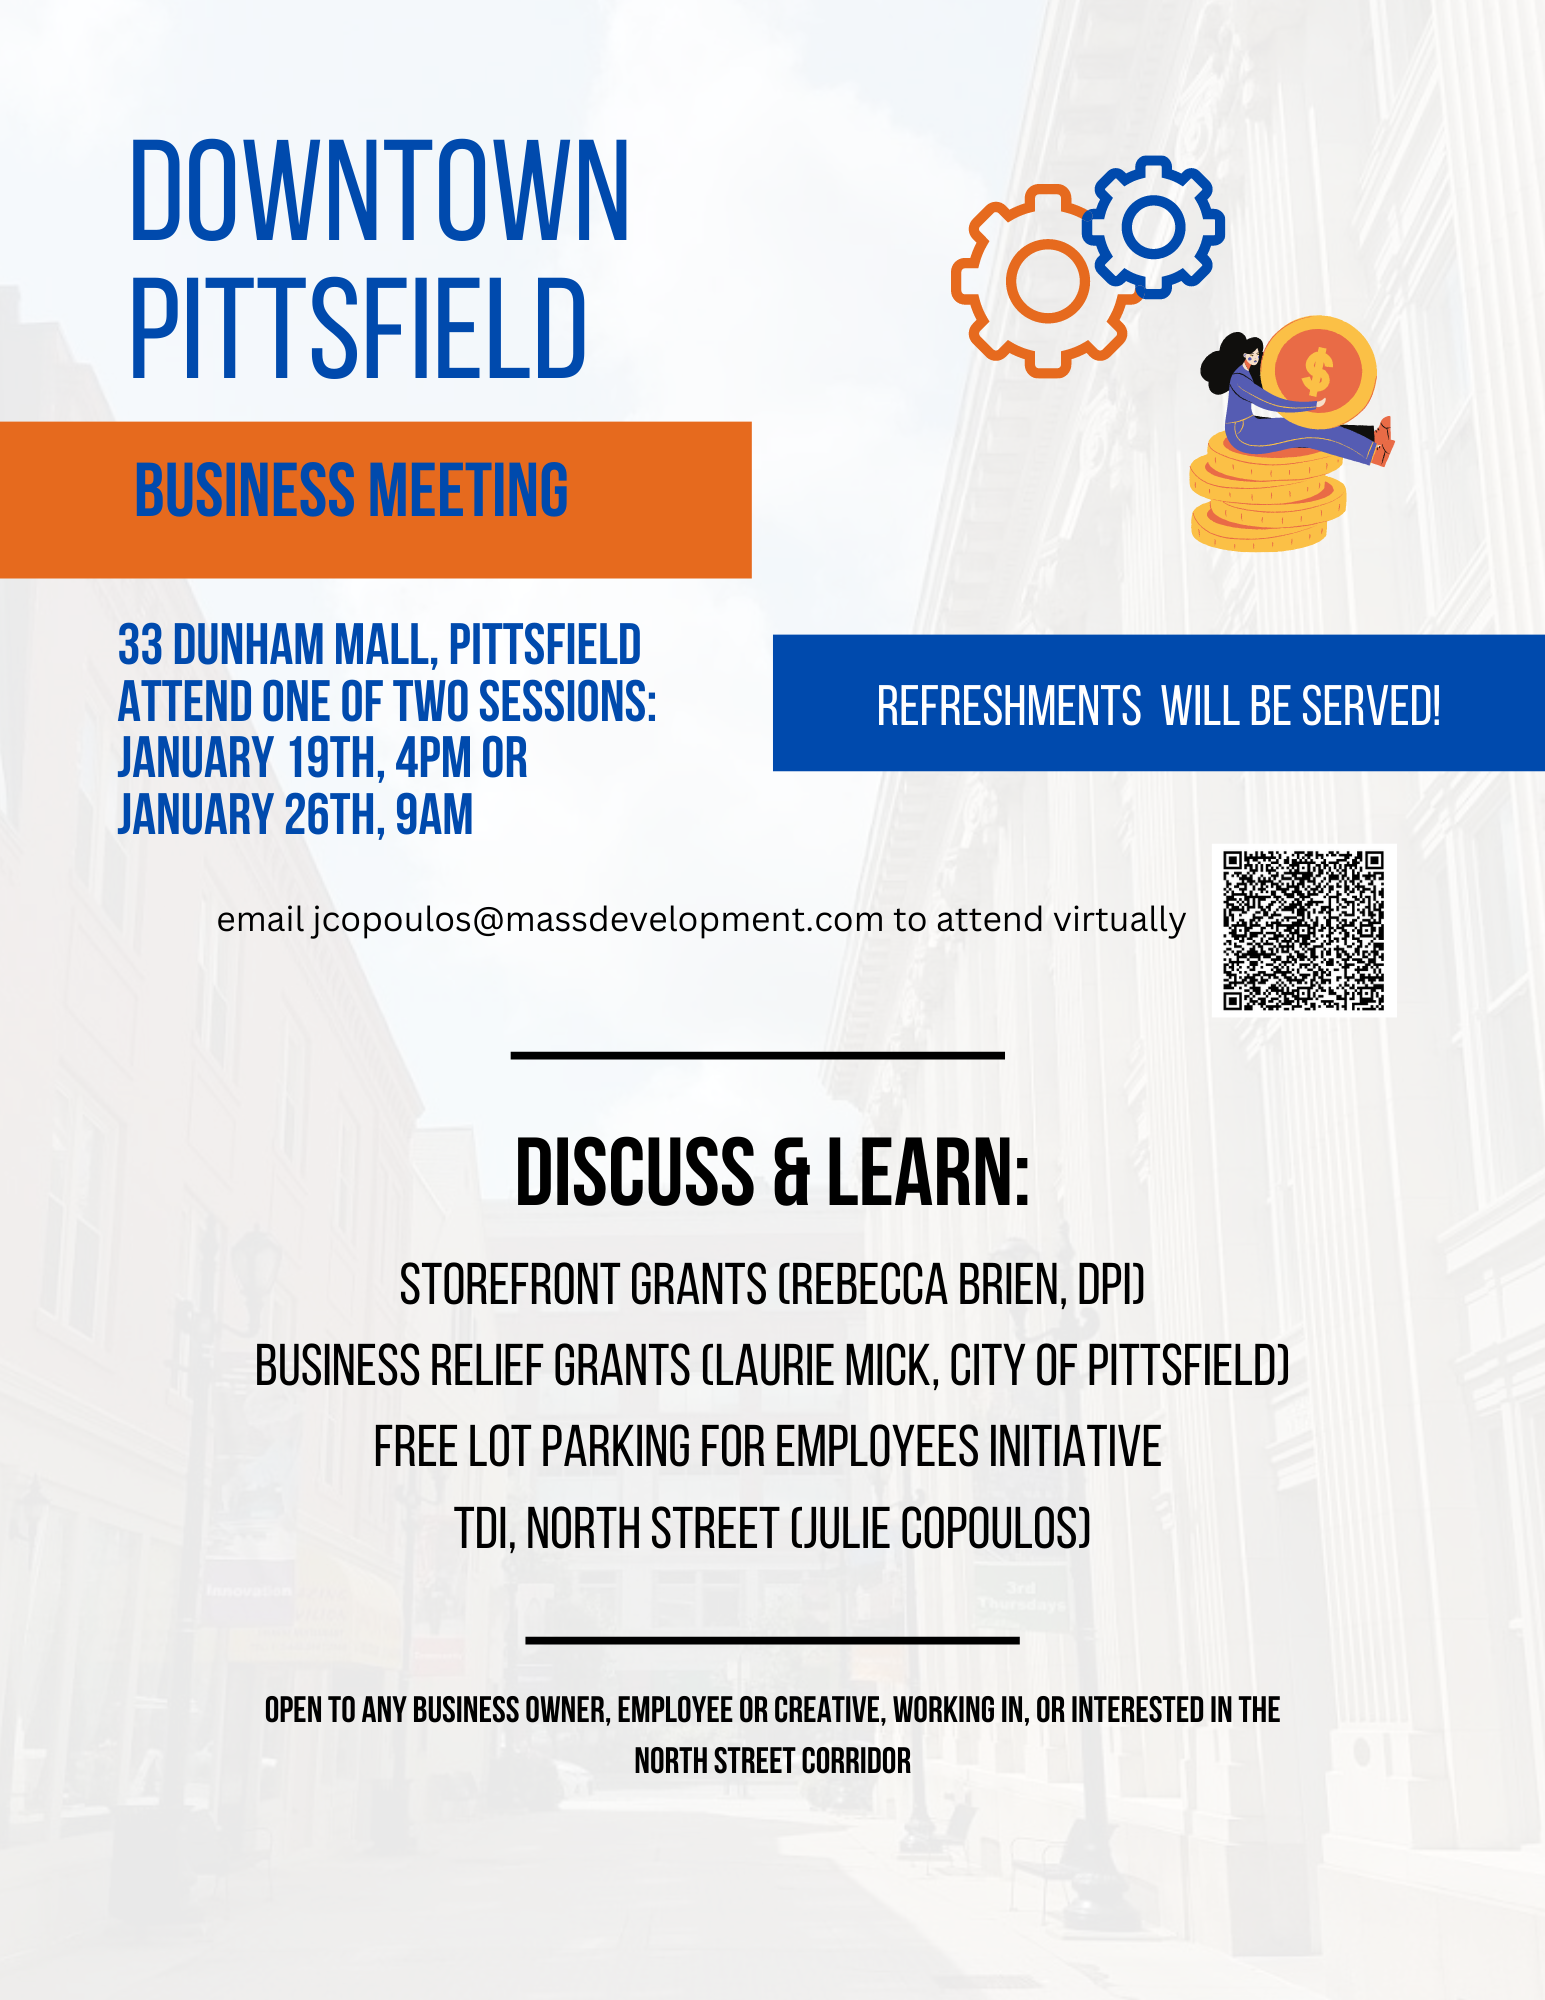 Downtown Pittsfield Business Meeting